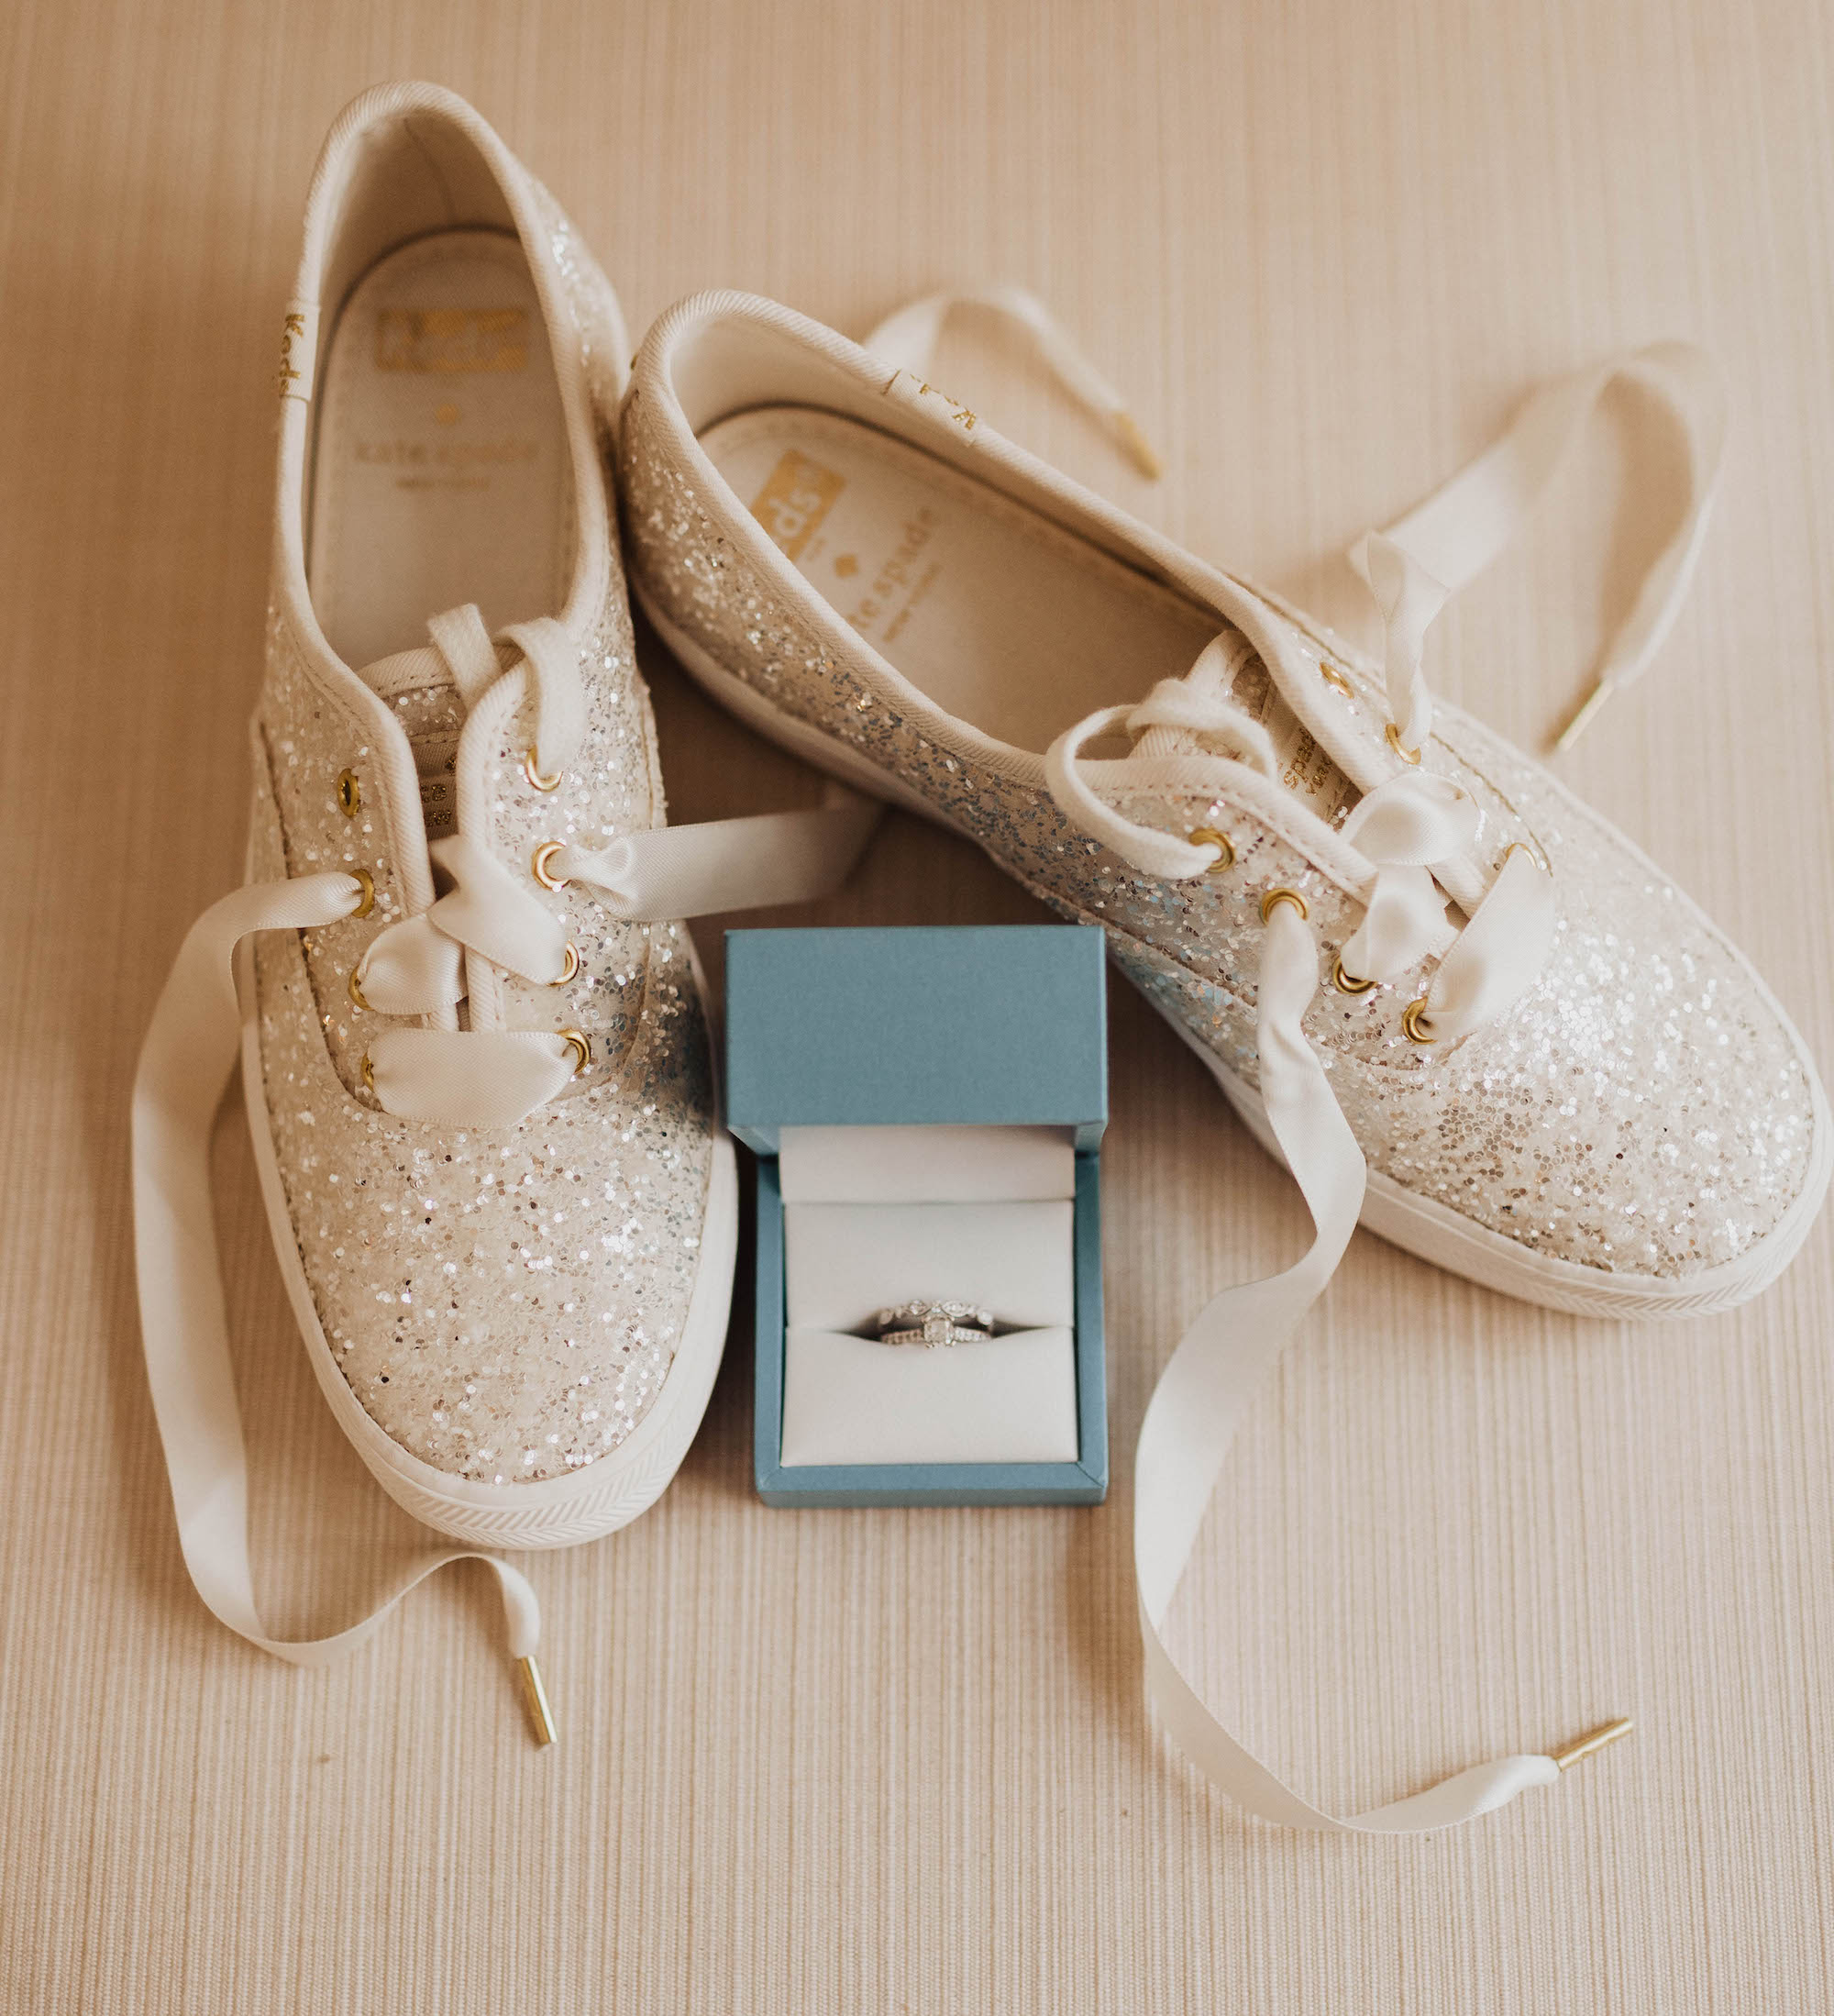 Kate Spade Ivory Glitter Sneaker Wedding Shoes, Engagement Ring in Dusty Blue Ring Box